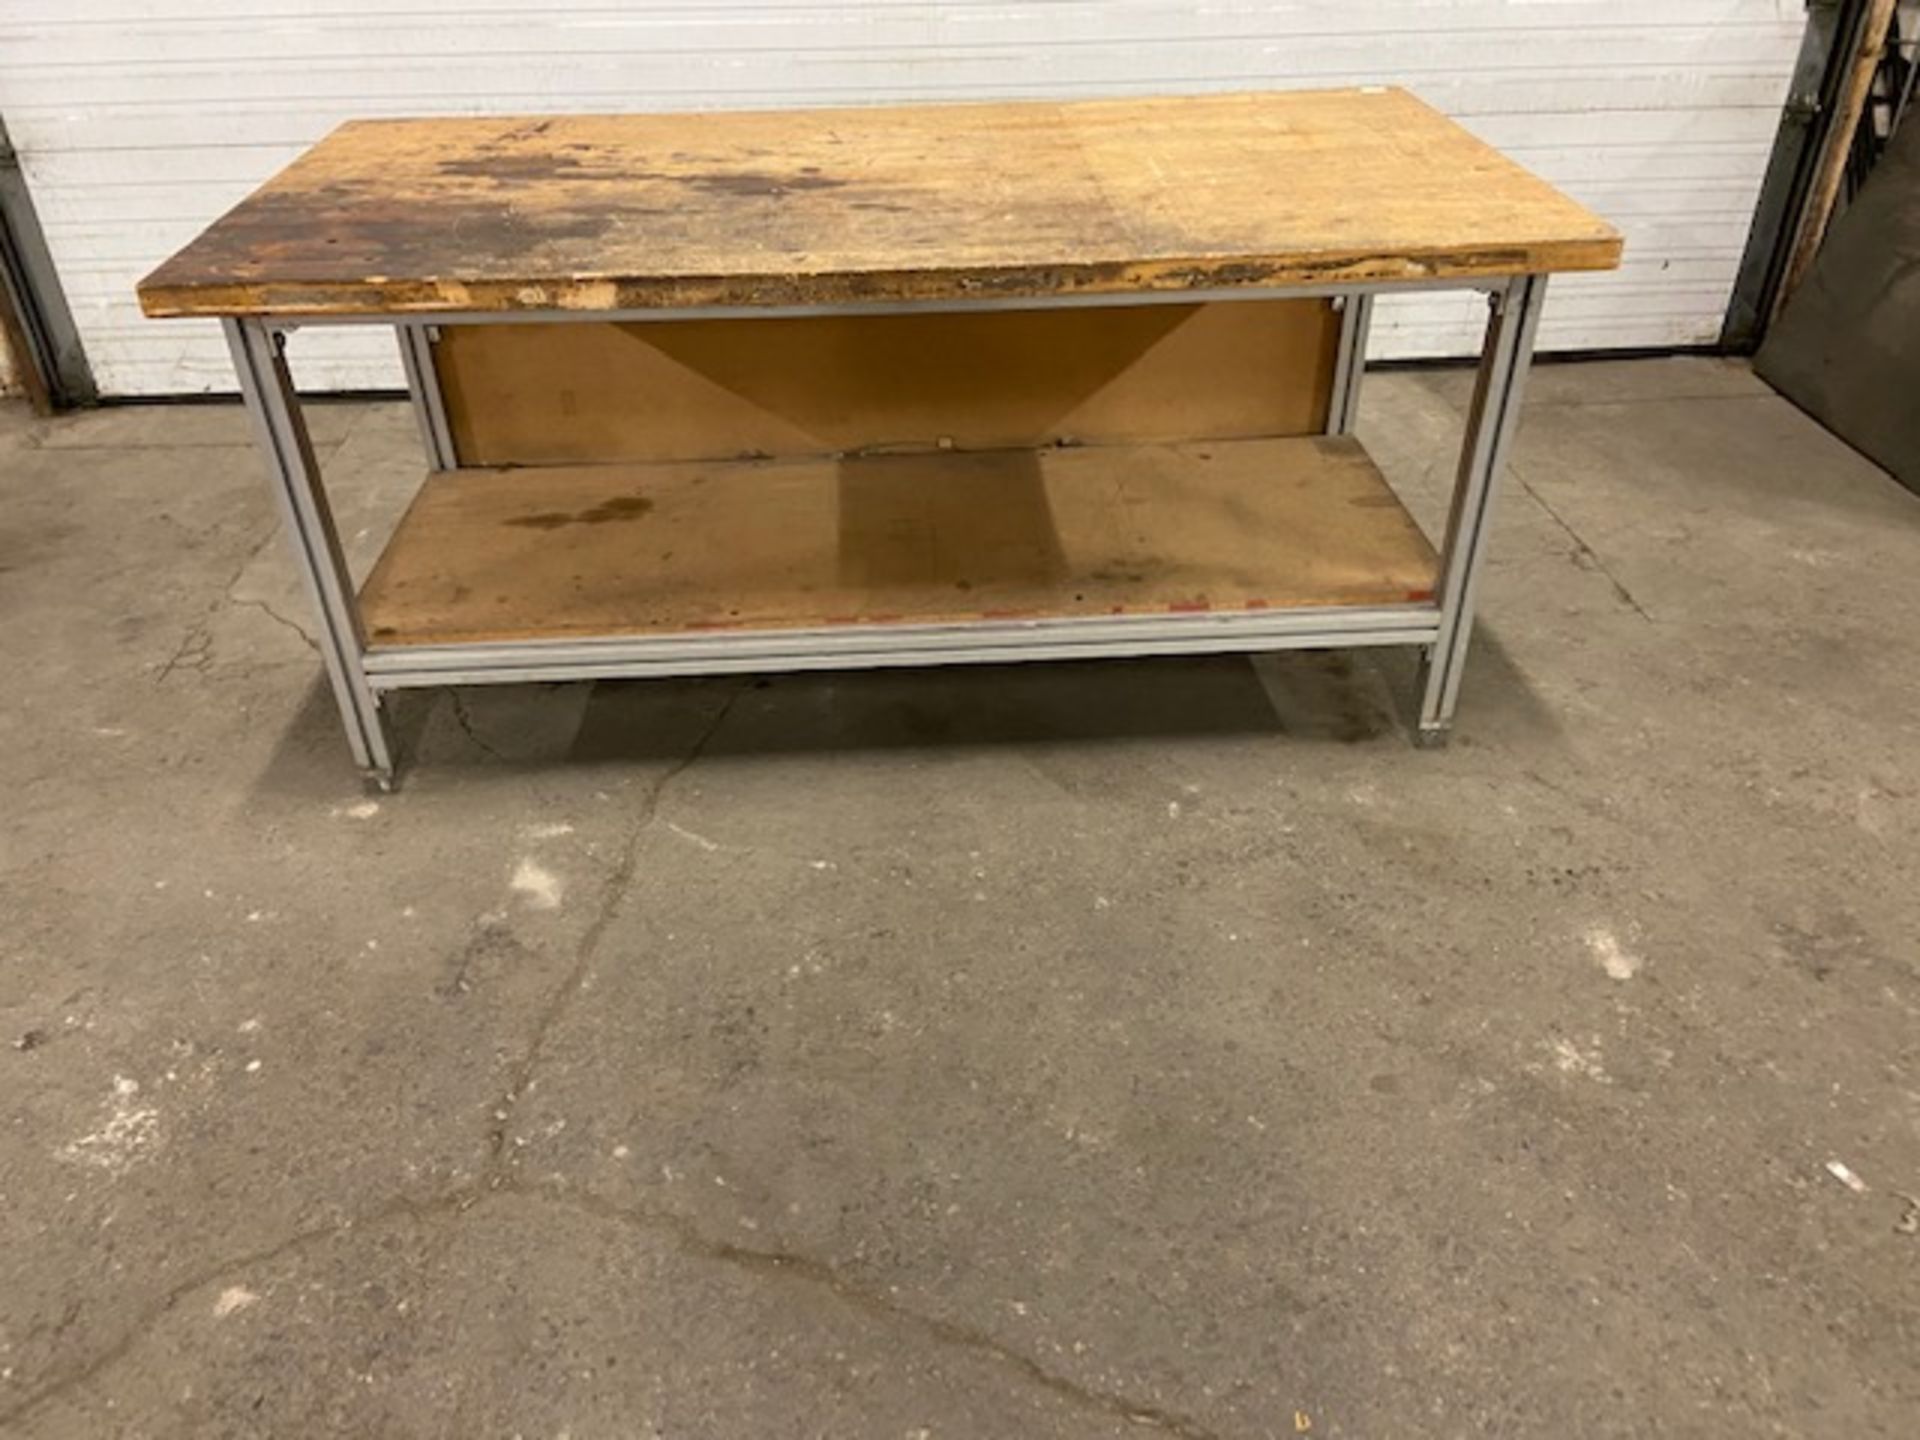 Work Table Work Bench Unit 72" x 36" with Wood Table Top